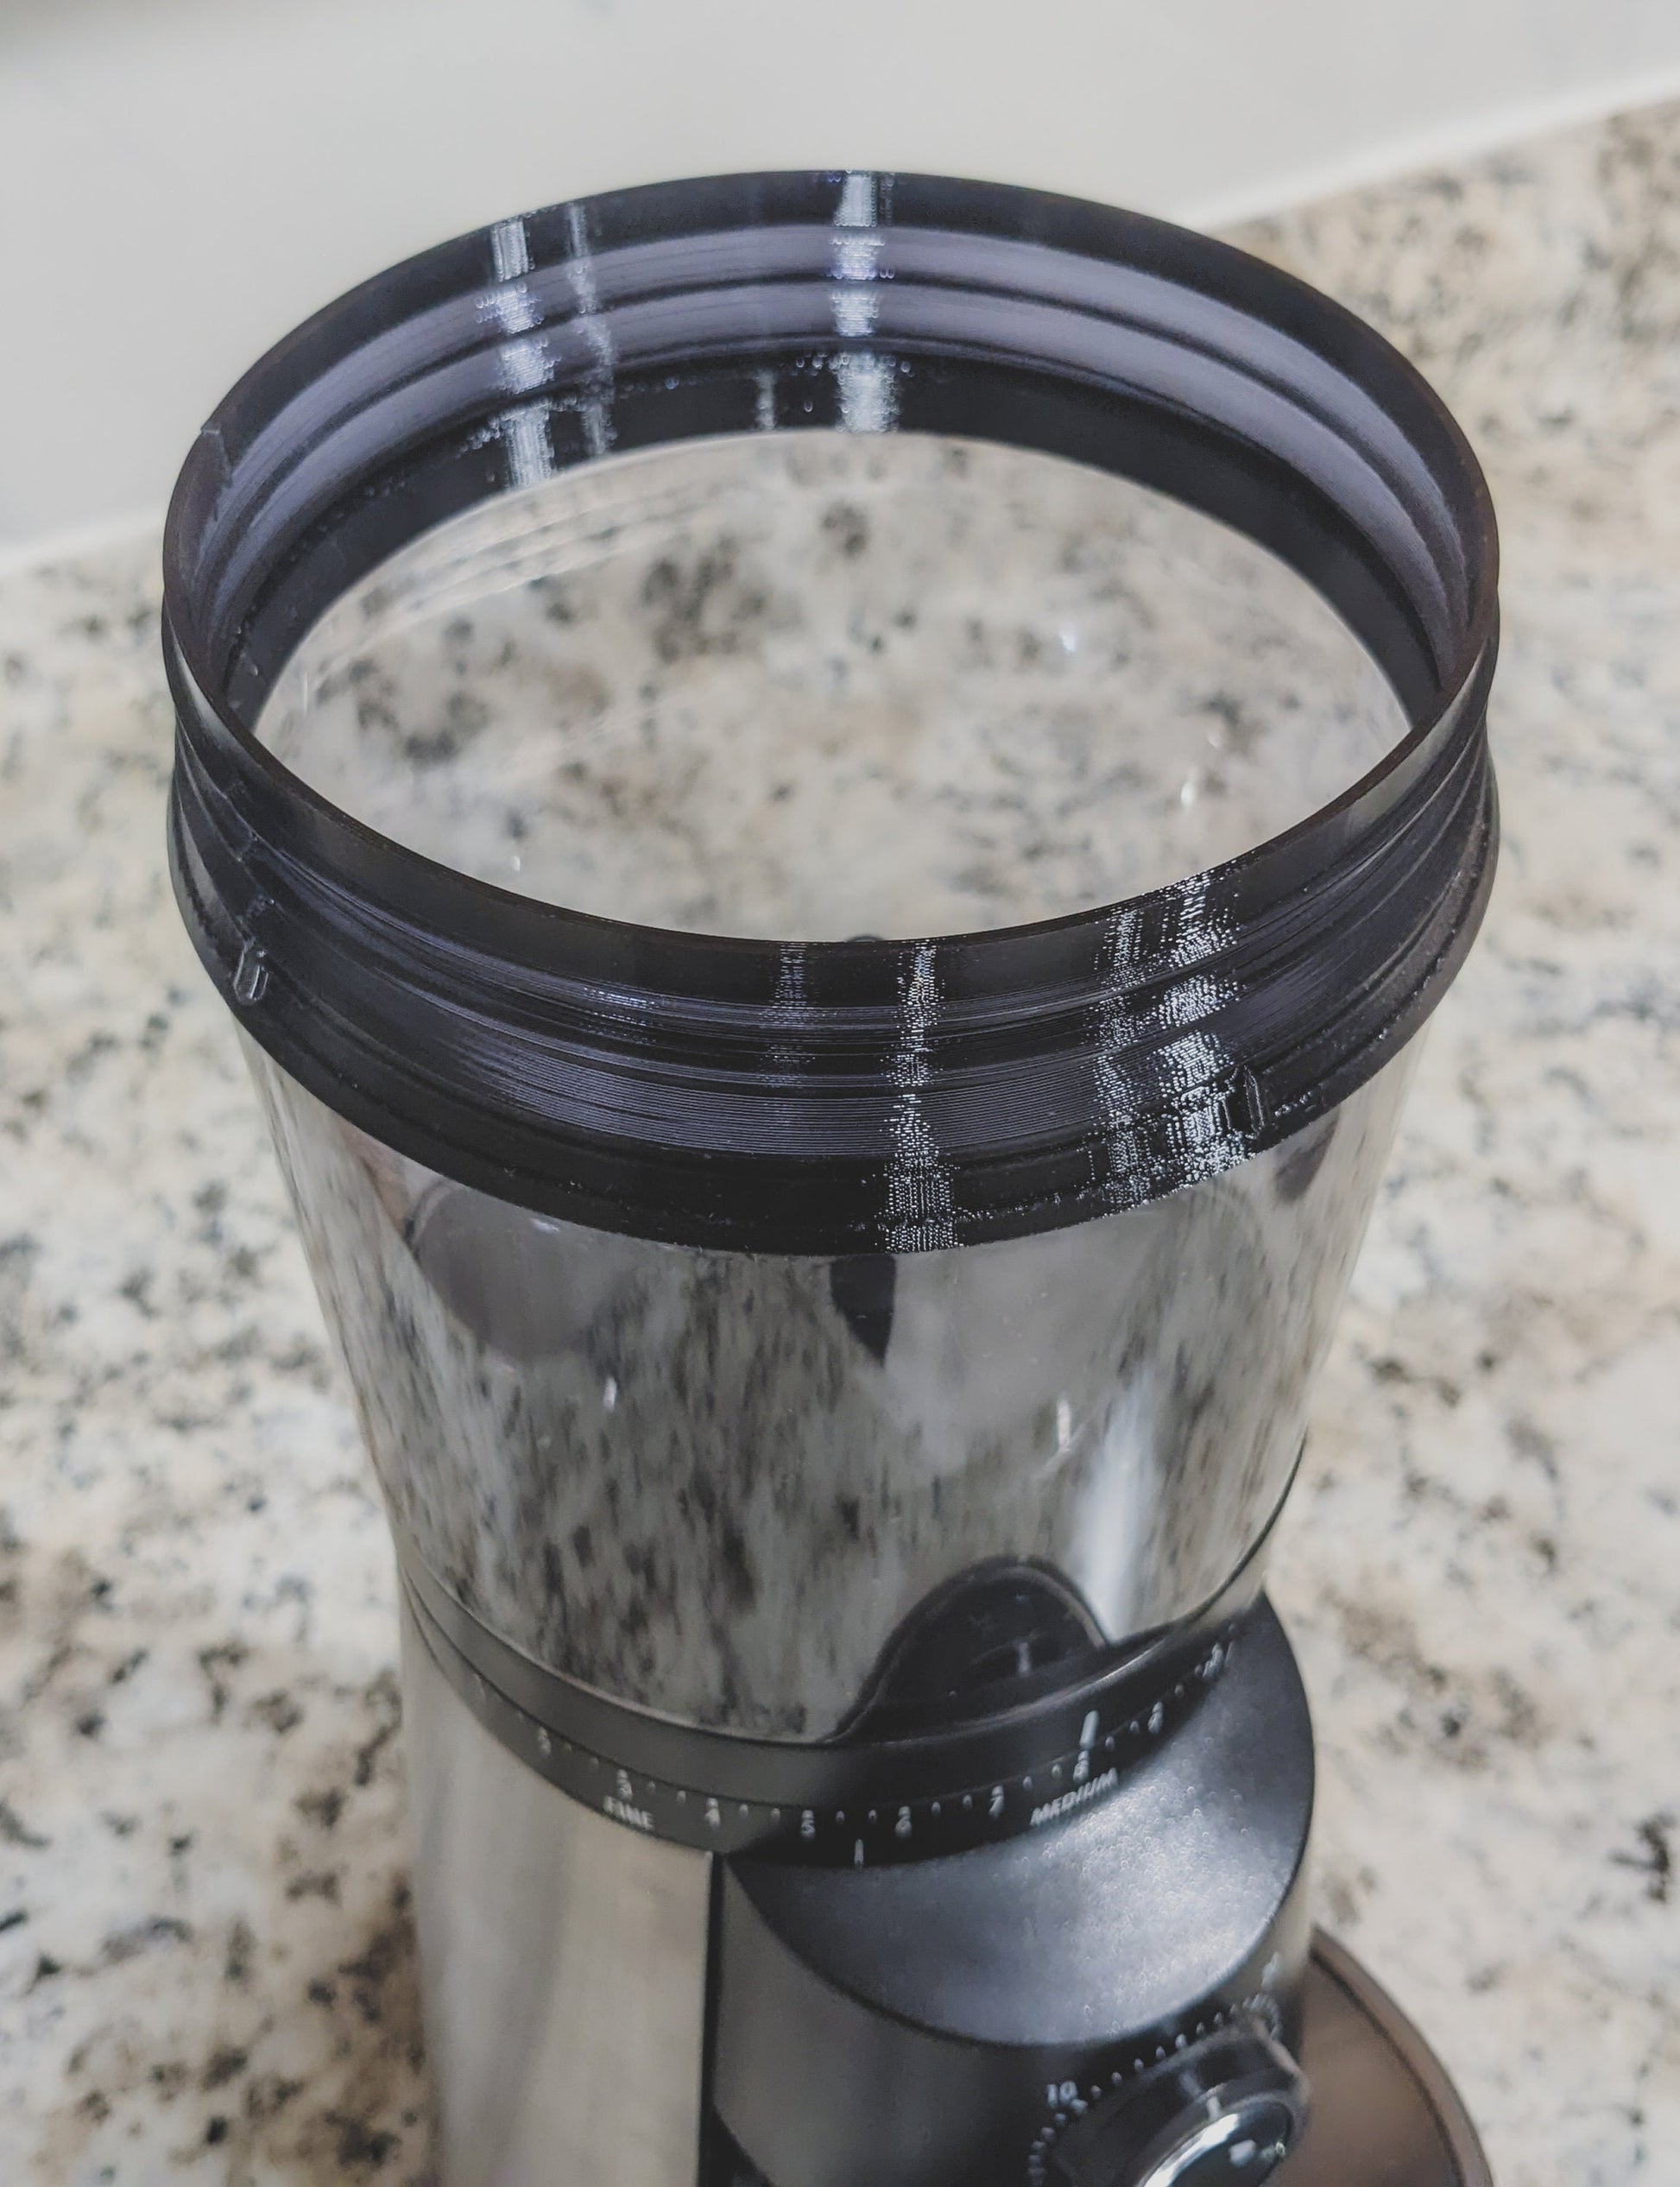 OXO Conical Burr Coffee Grinder Review: for the best value